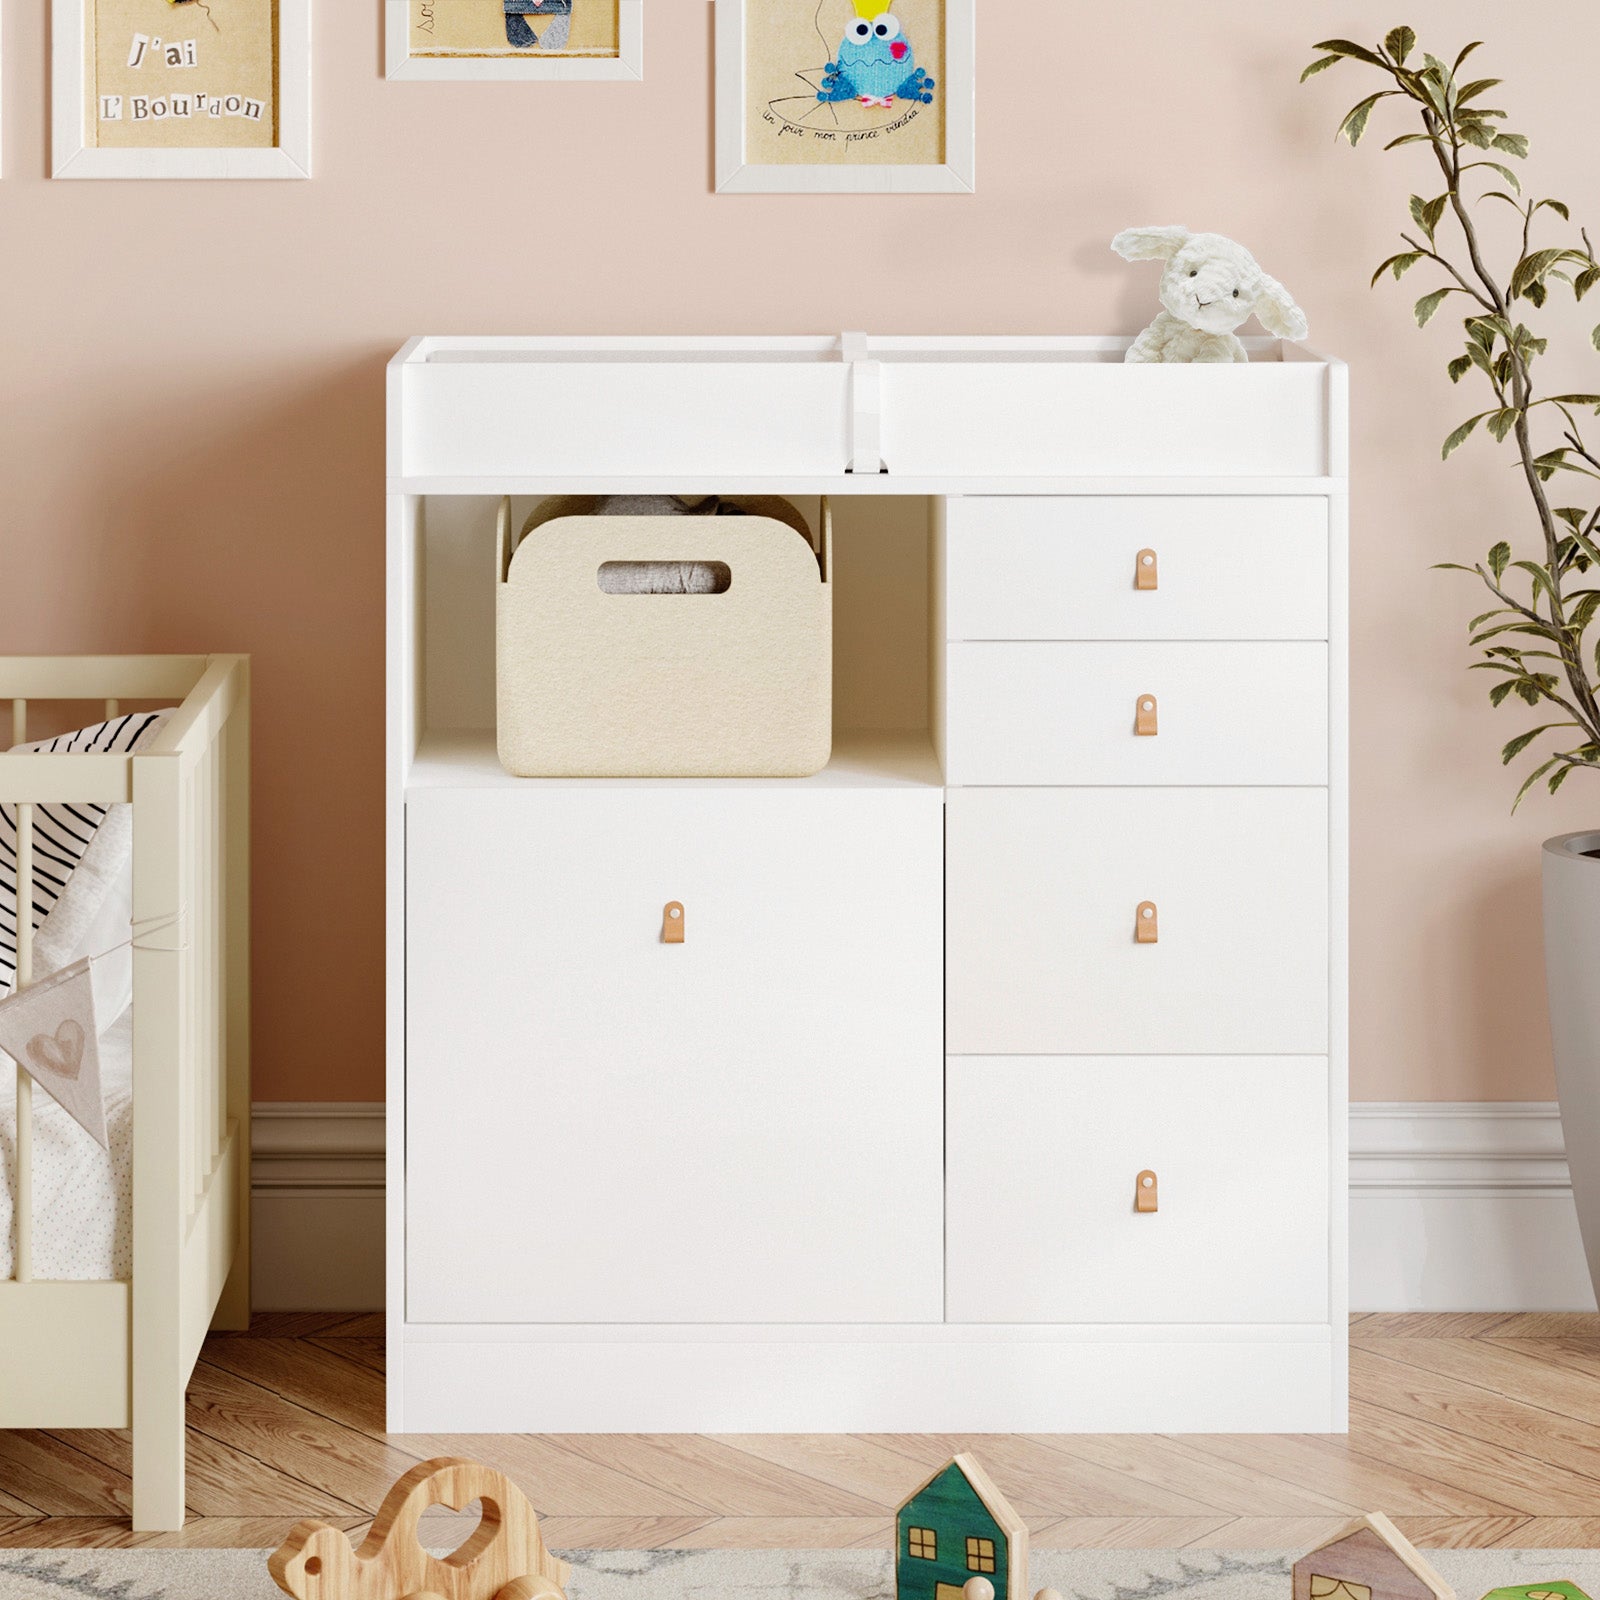 Infant Changing Table Baby Changing Table with 5 Drawers 1 Open Storage